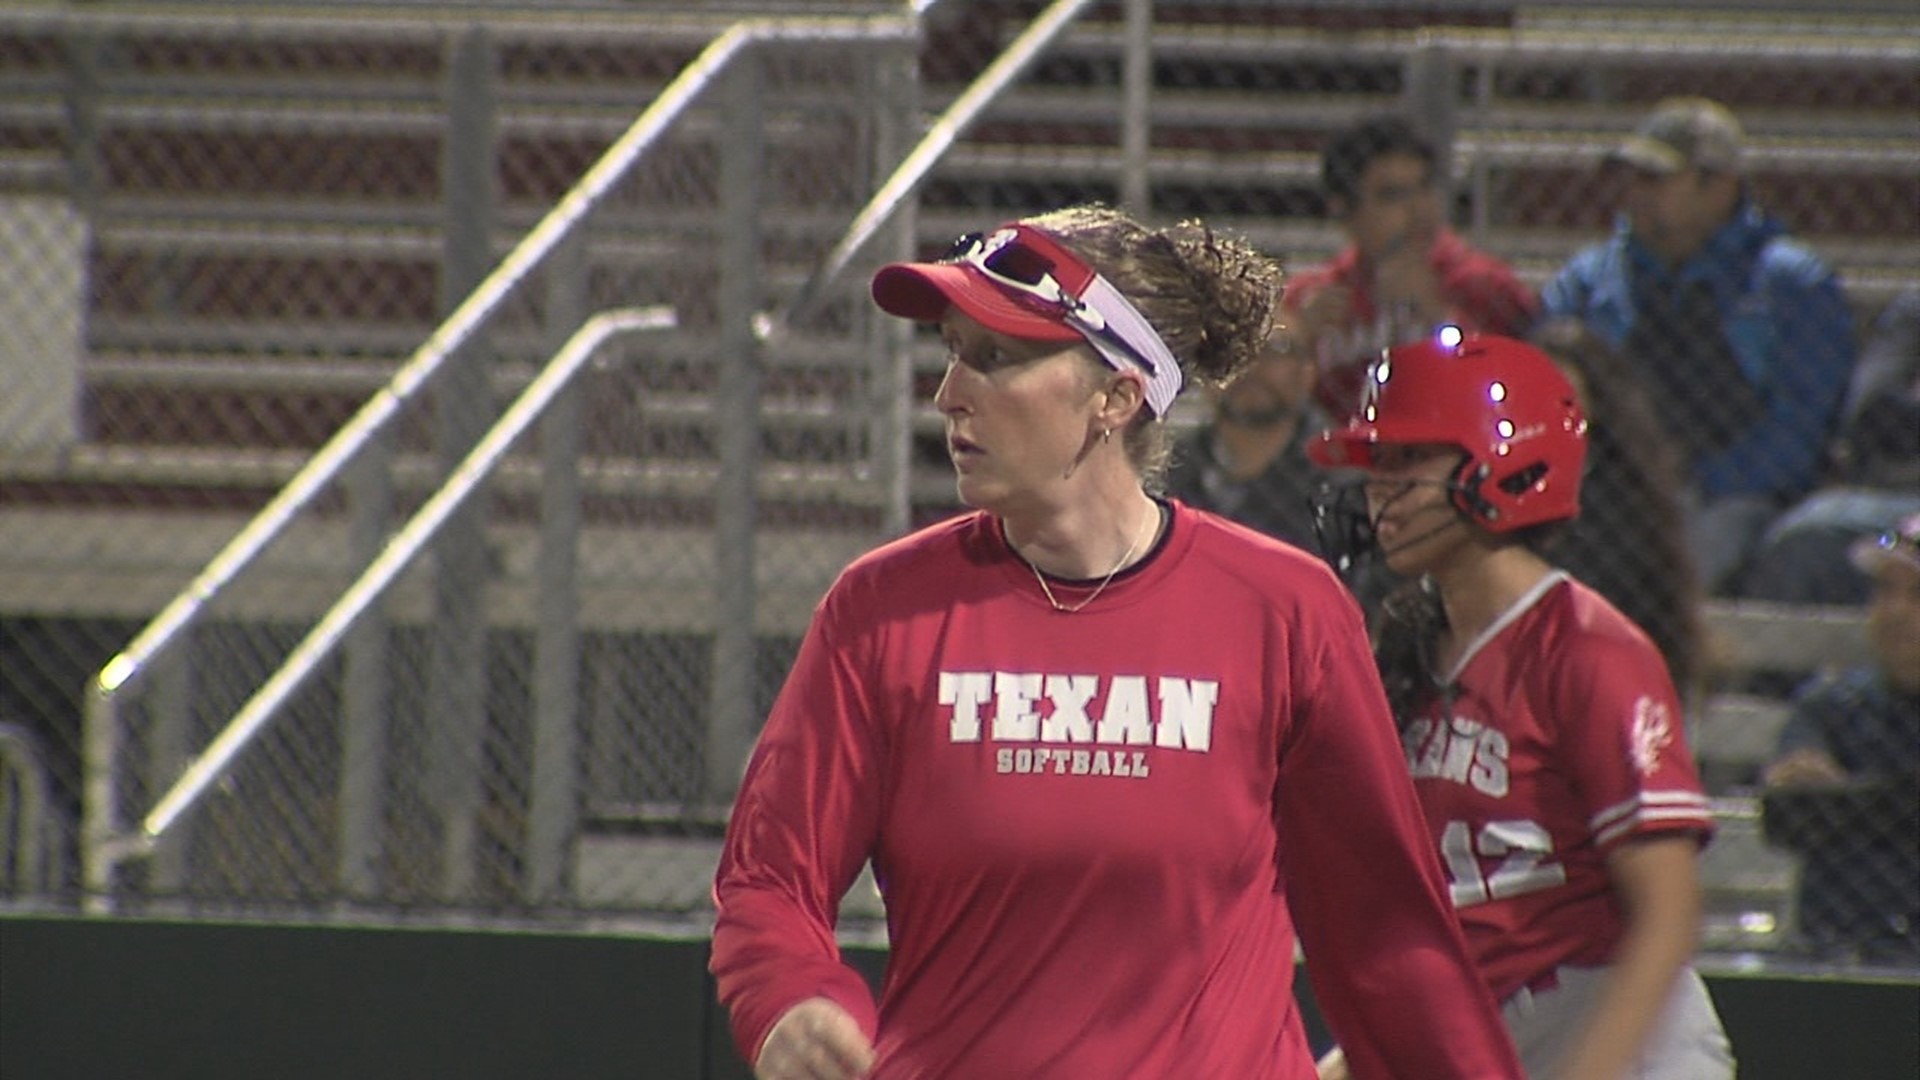 The Texans rallied from an early deficit to get the 3-2 win Tuesday at Cabaniss.